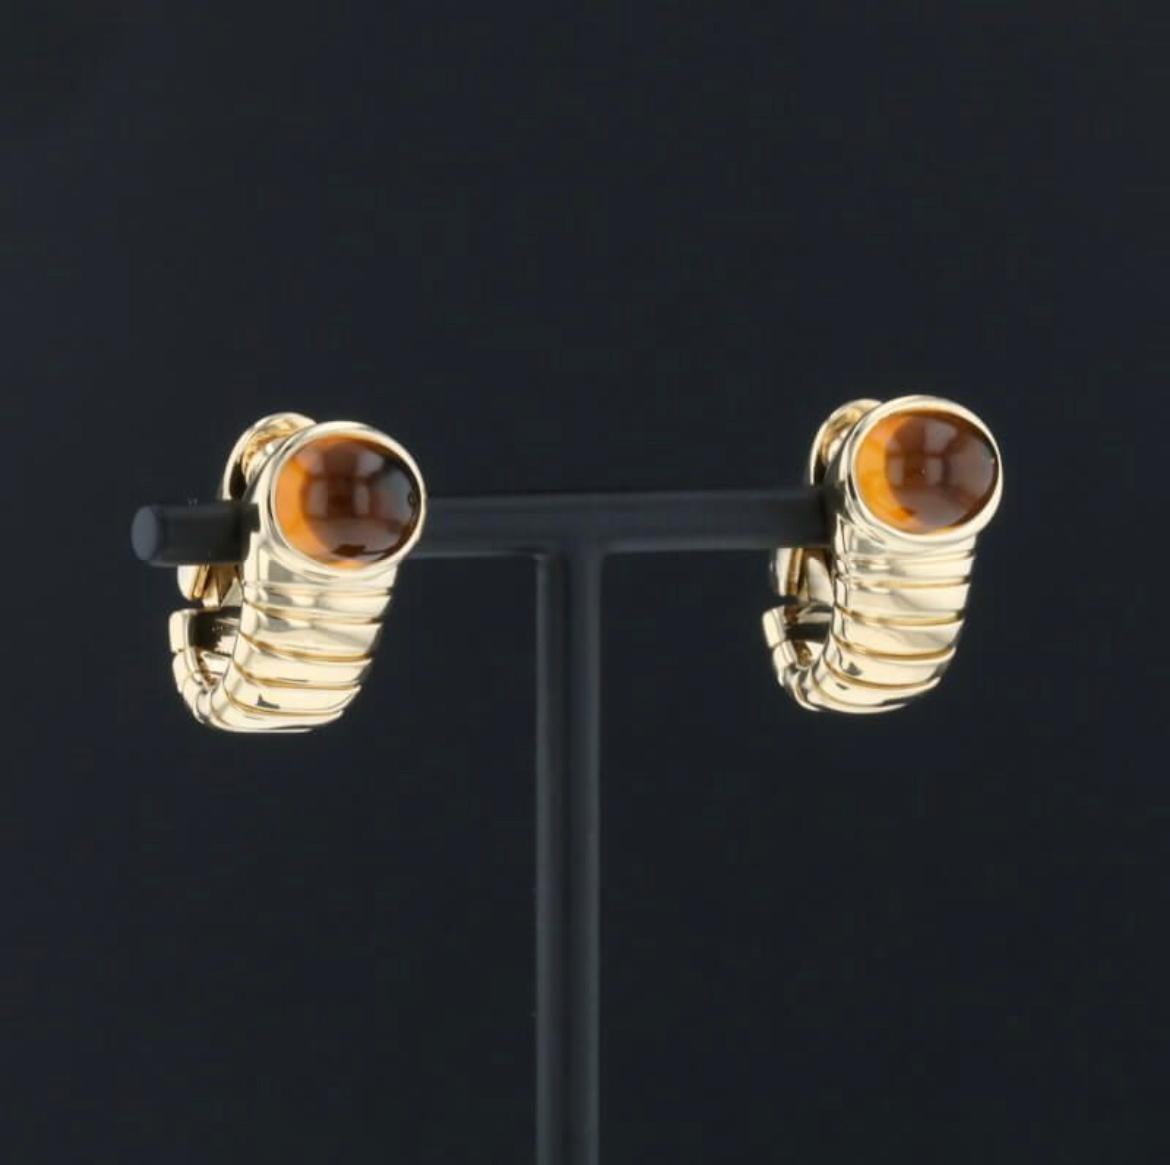 Classic Bulgari design for these Tubogas earrings, designed and made in Italy in solid 18k yellow gold, they feature 2 vivid large Citrine. Made in Italy, circa 1980

Has a total weight of 22 grams.
Dimensions: cm 1,2 x 2,3

Stamped, with the